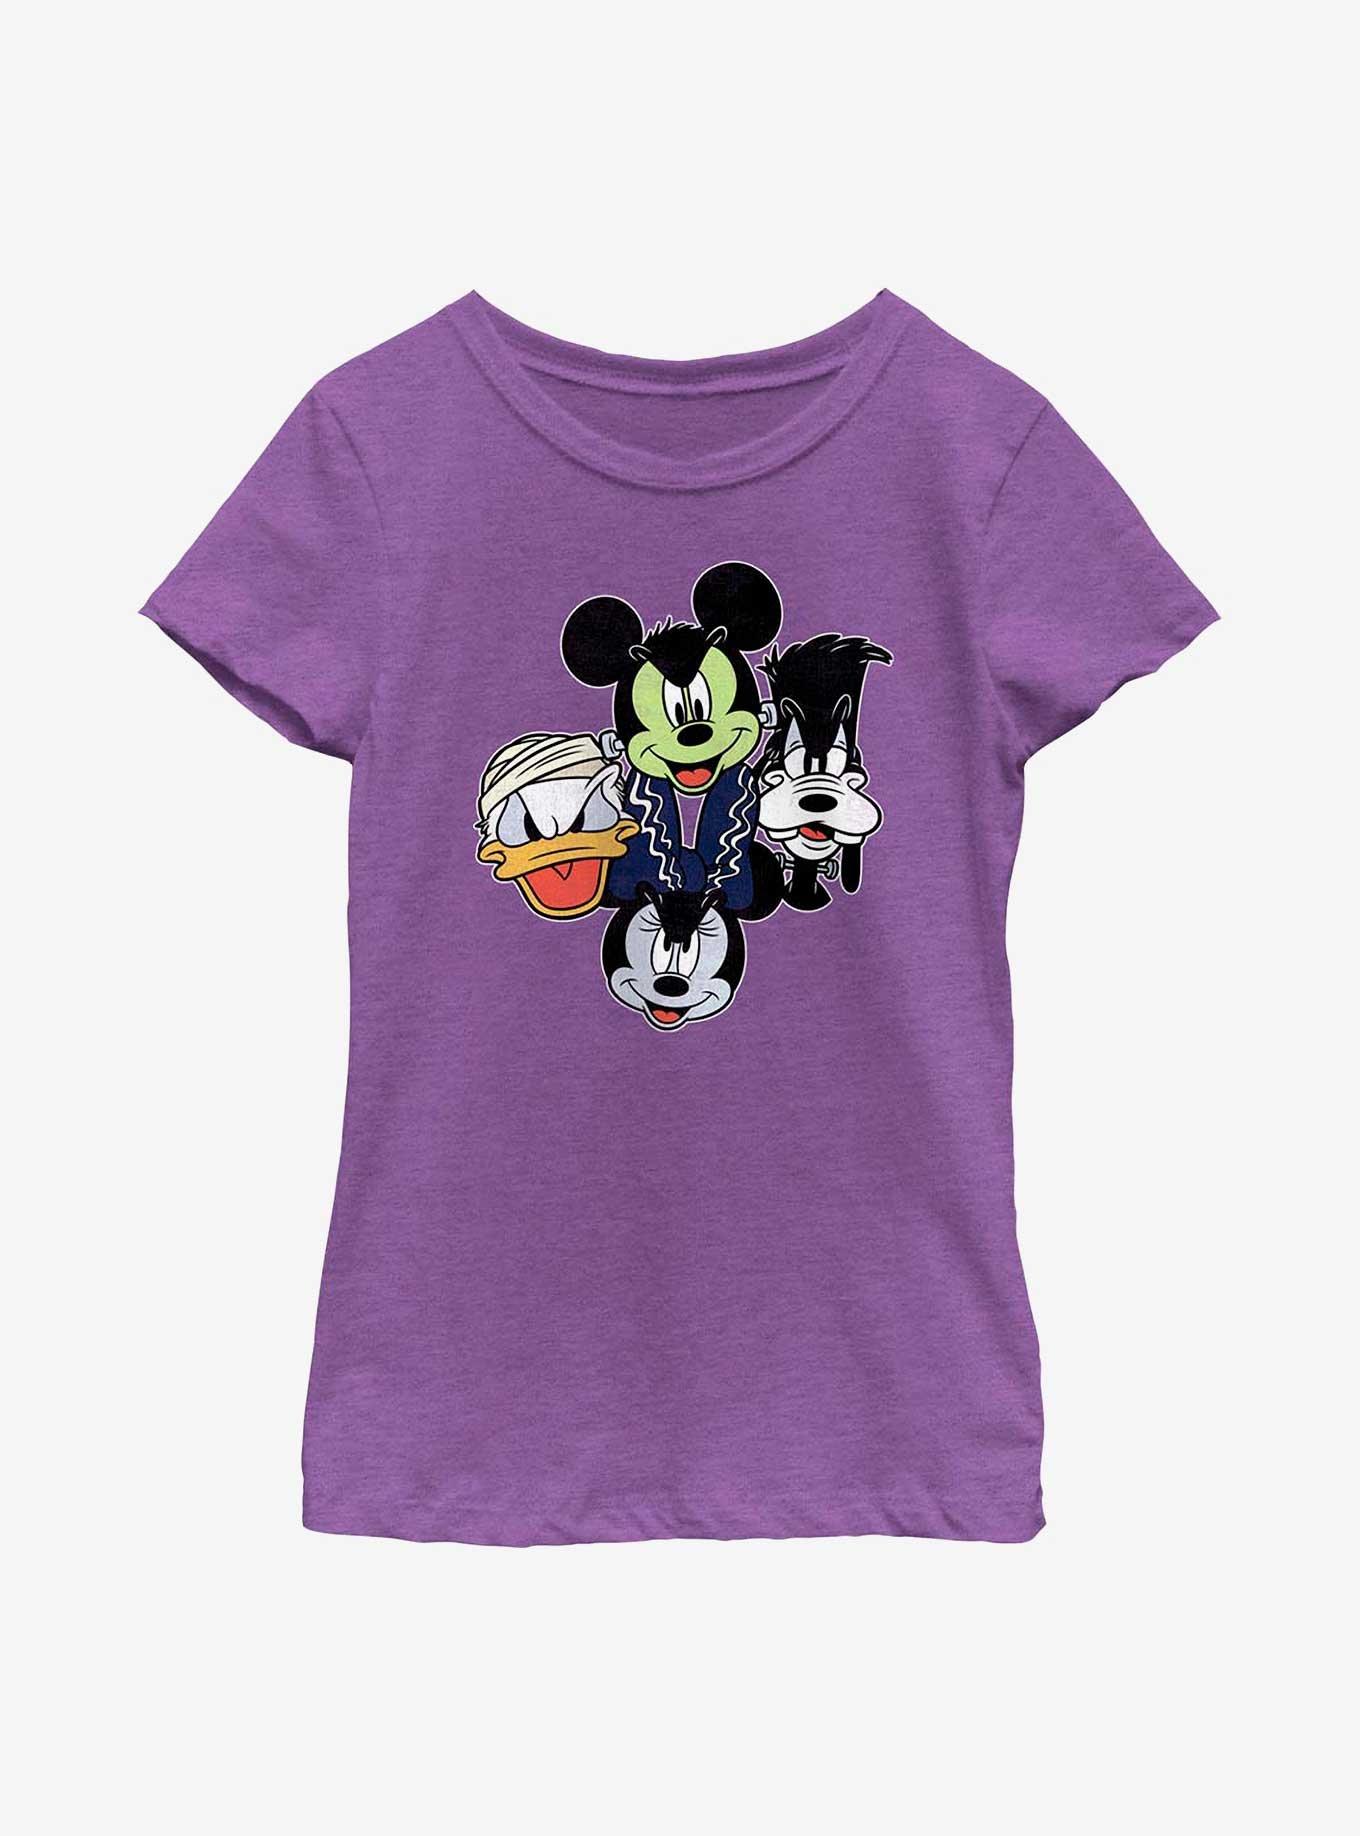 Disney Mickey Mouse & Friends Halloween Heads Youth Girls T-Shirt, , hi-res